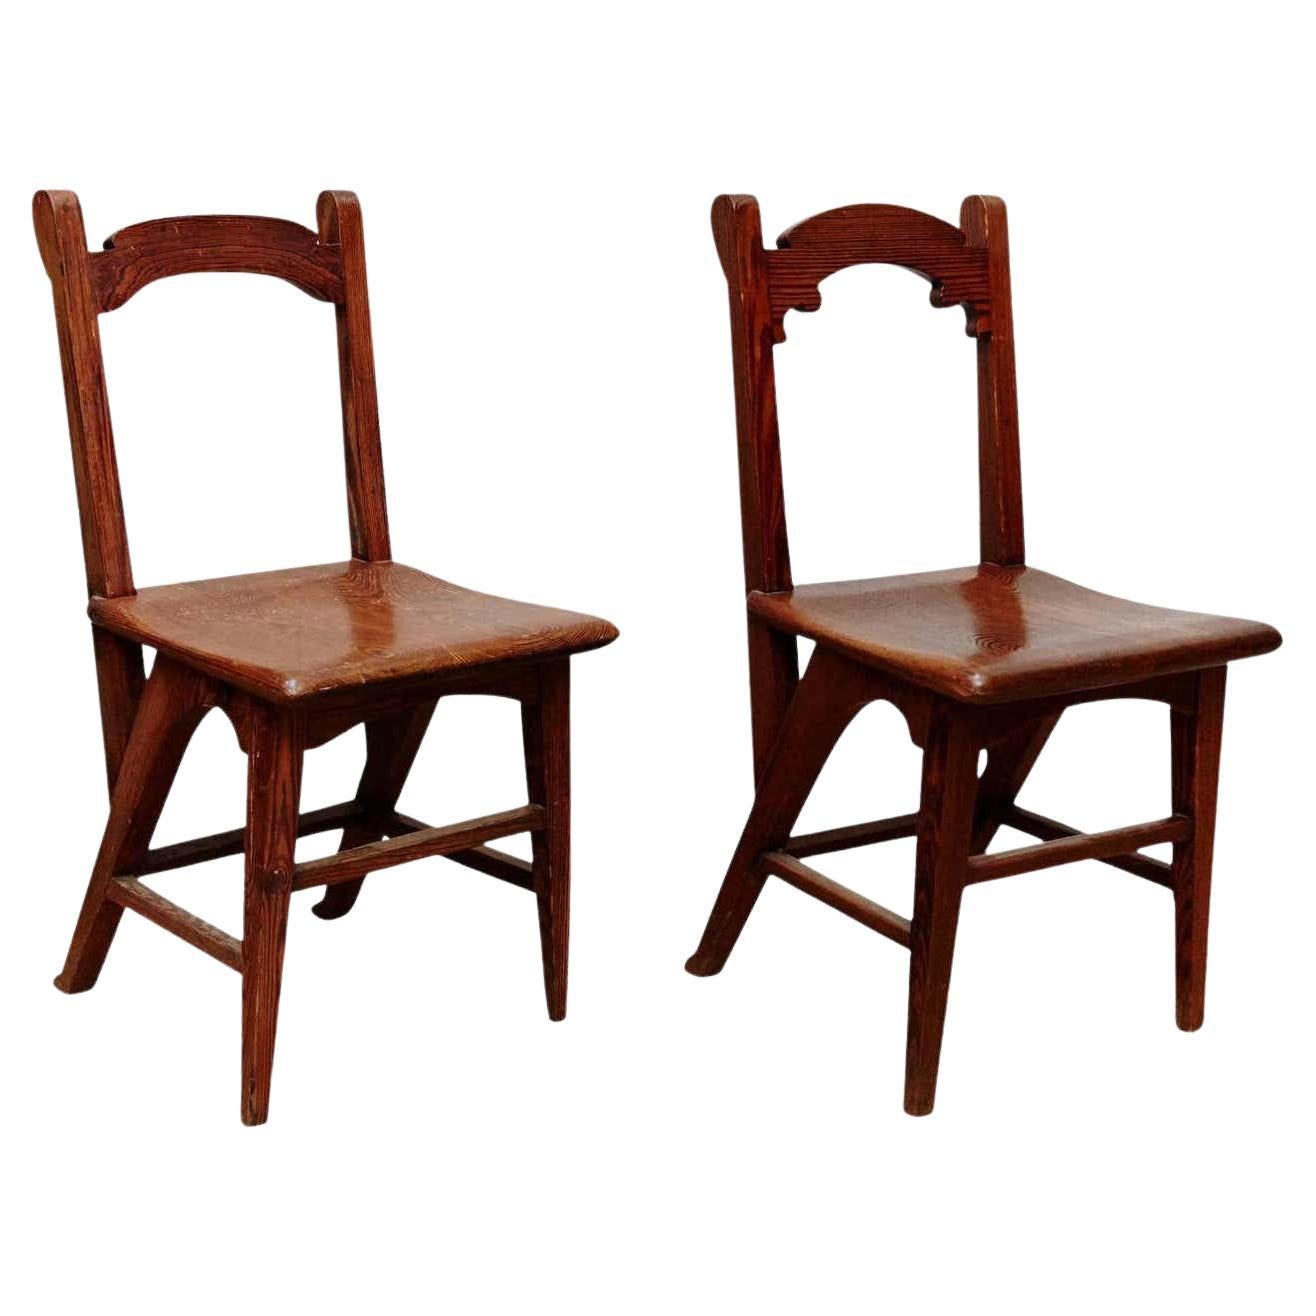 Pair of Catalan Modernist Wooden Chairs, circa 1920 For Sale